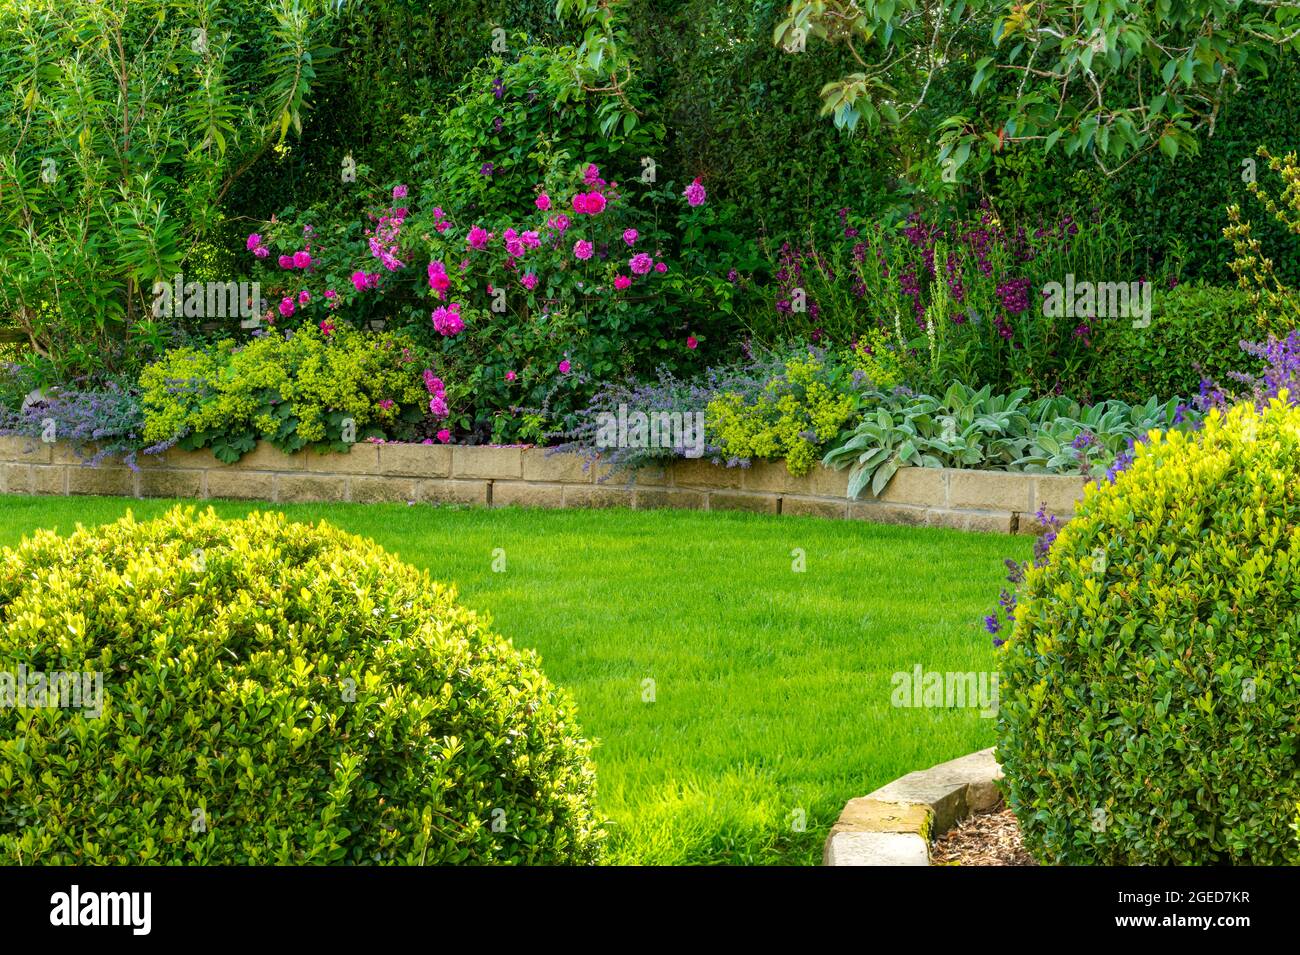 Landscaped sunny private garden (contemporary design, colourful summer flowers, border plants, neat lawn, low stone walls) - Yorkshire, England, UK. Stock Photo